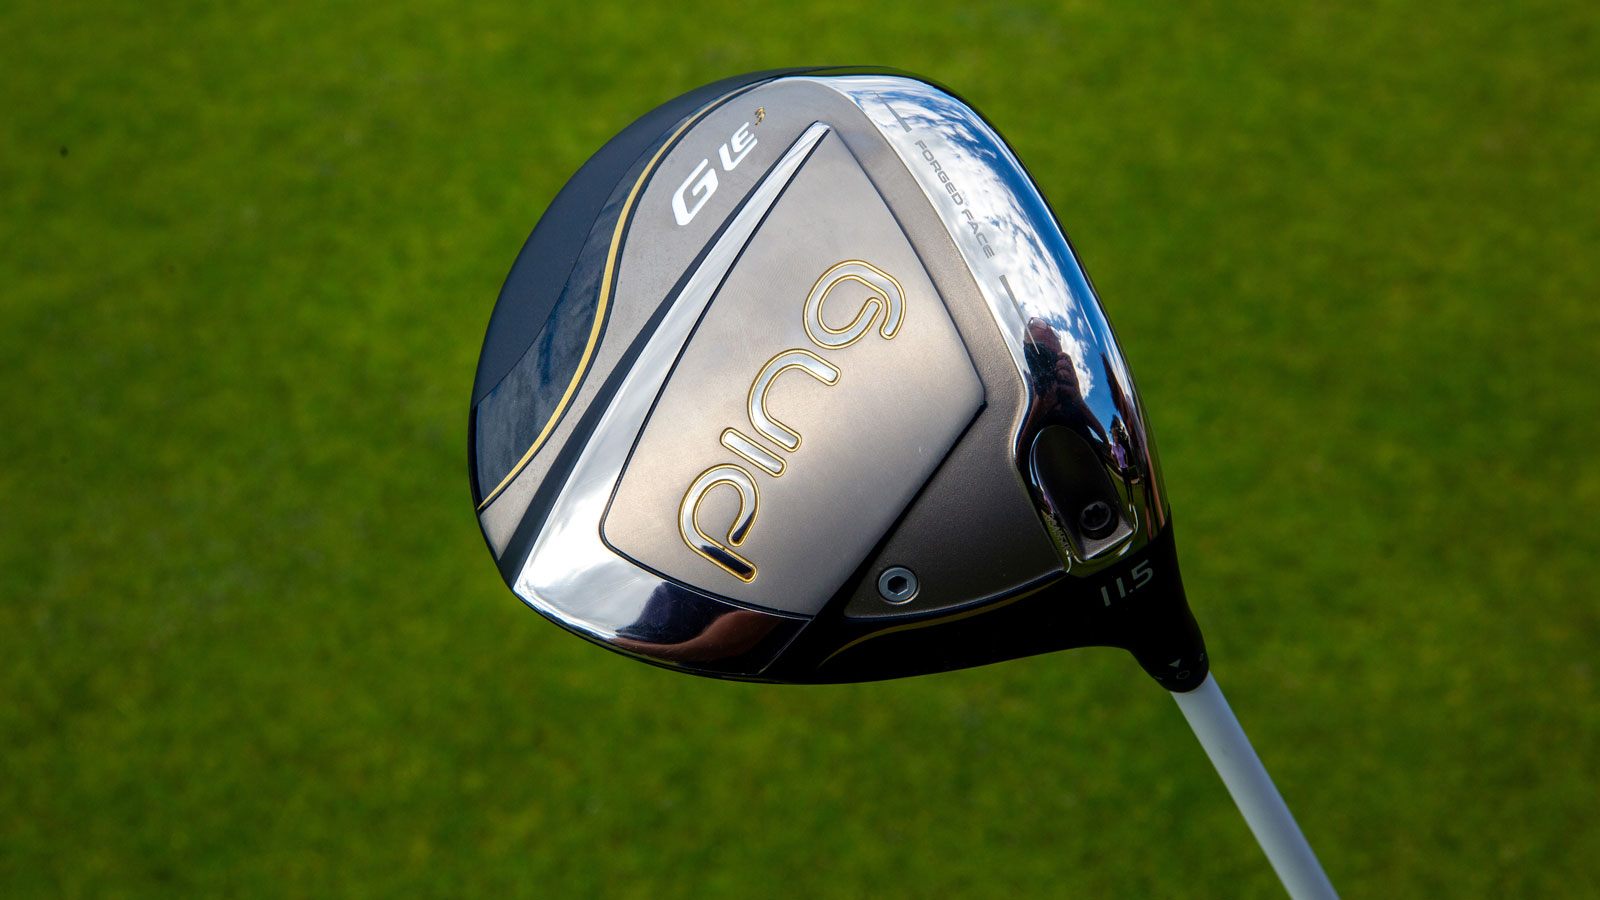 Ping G Le3 Driver Review | Golf Monthly